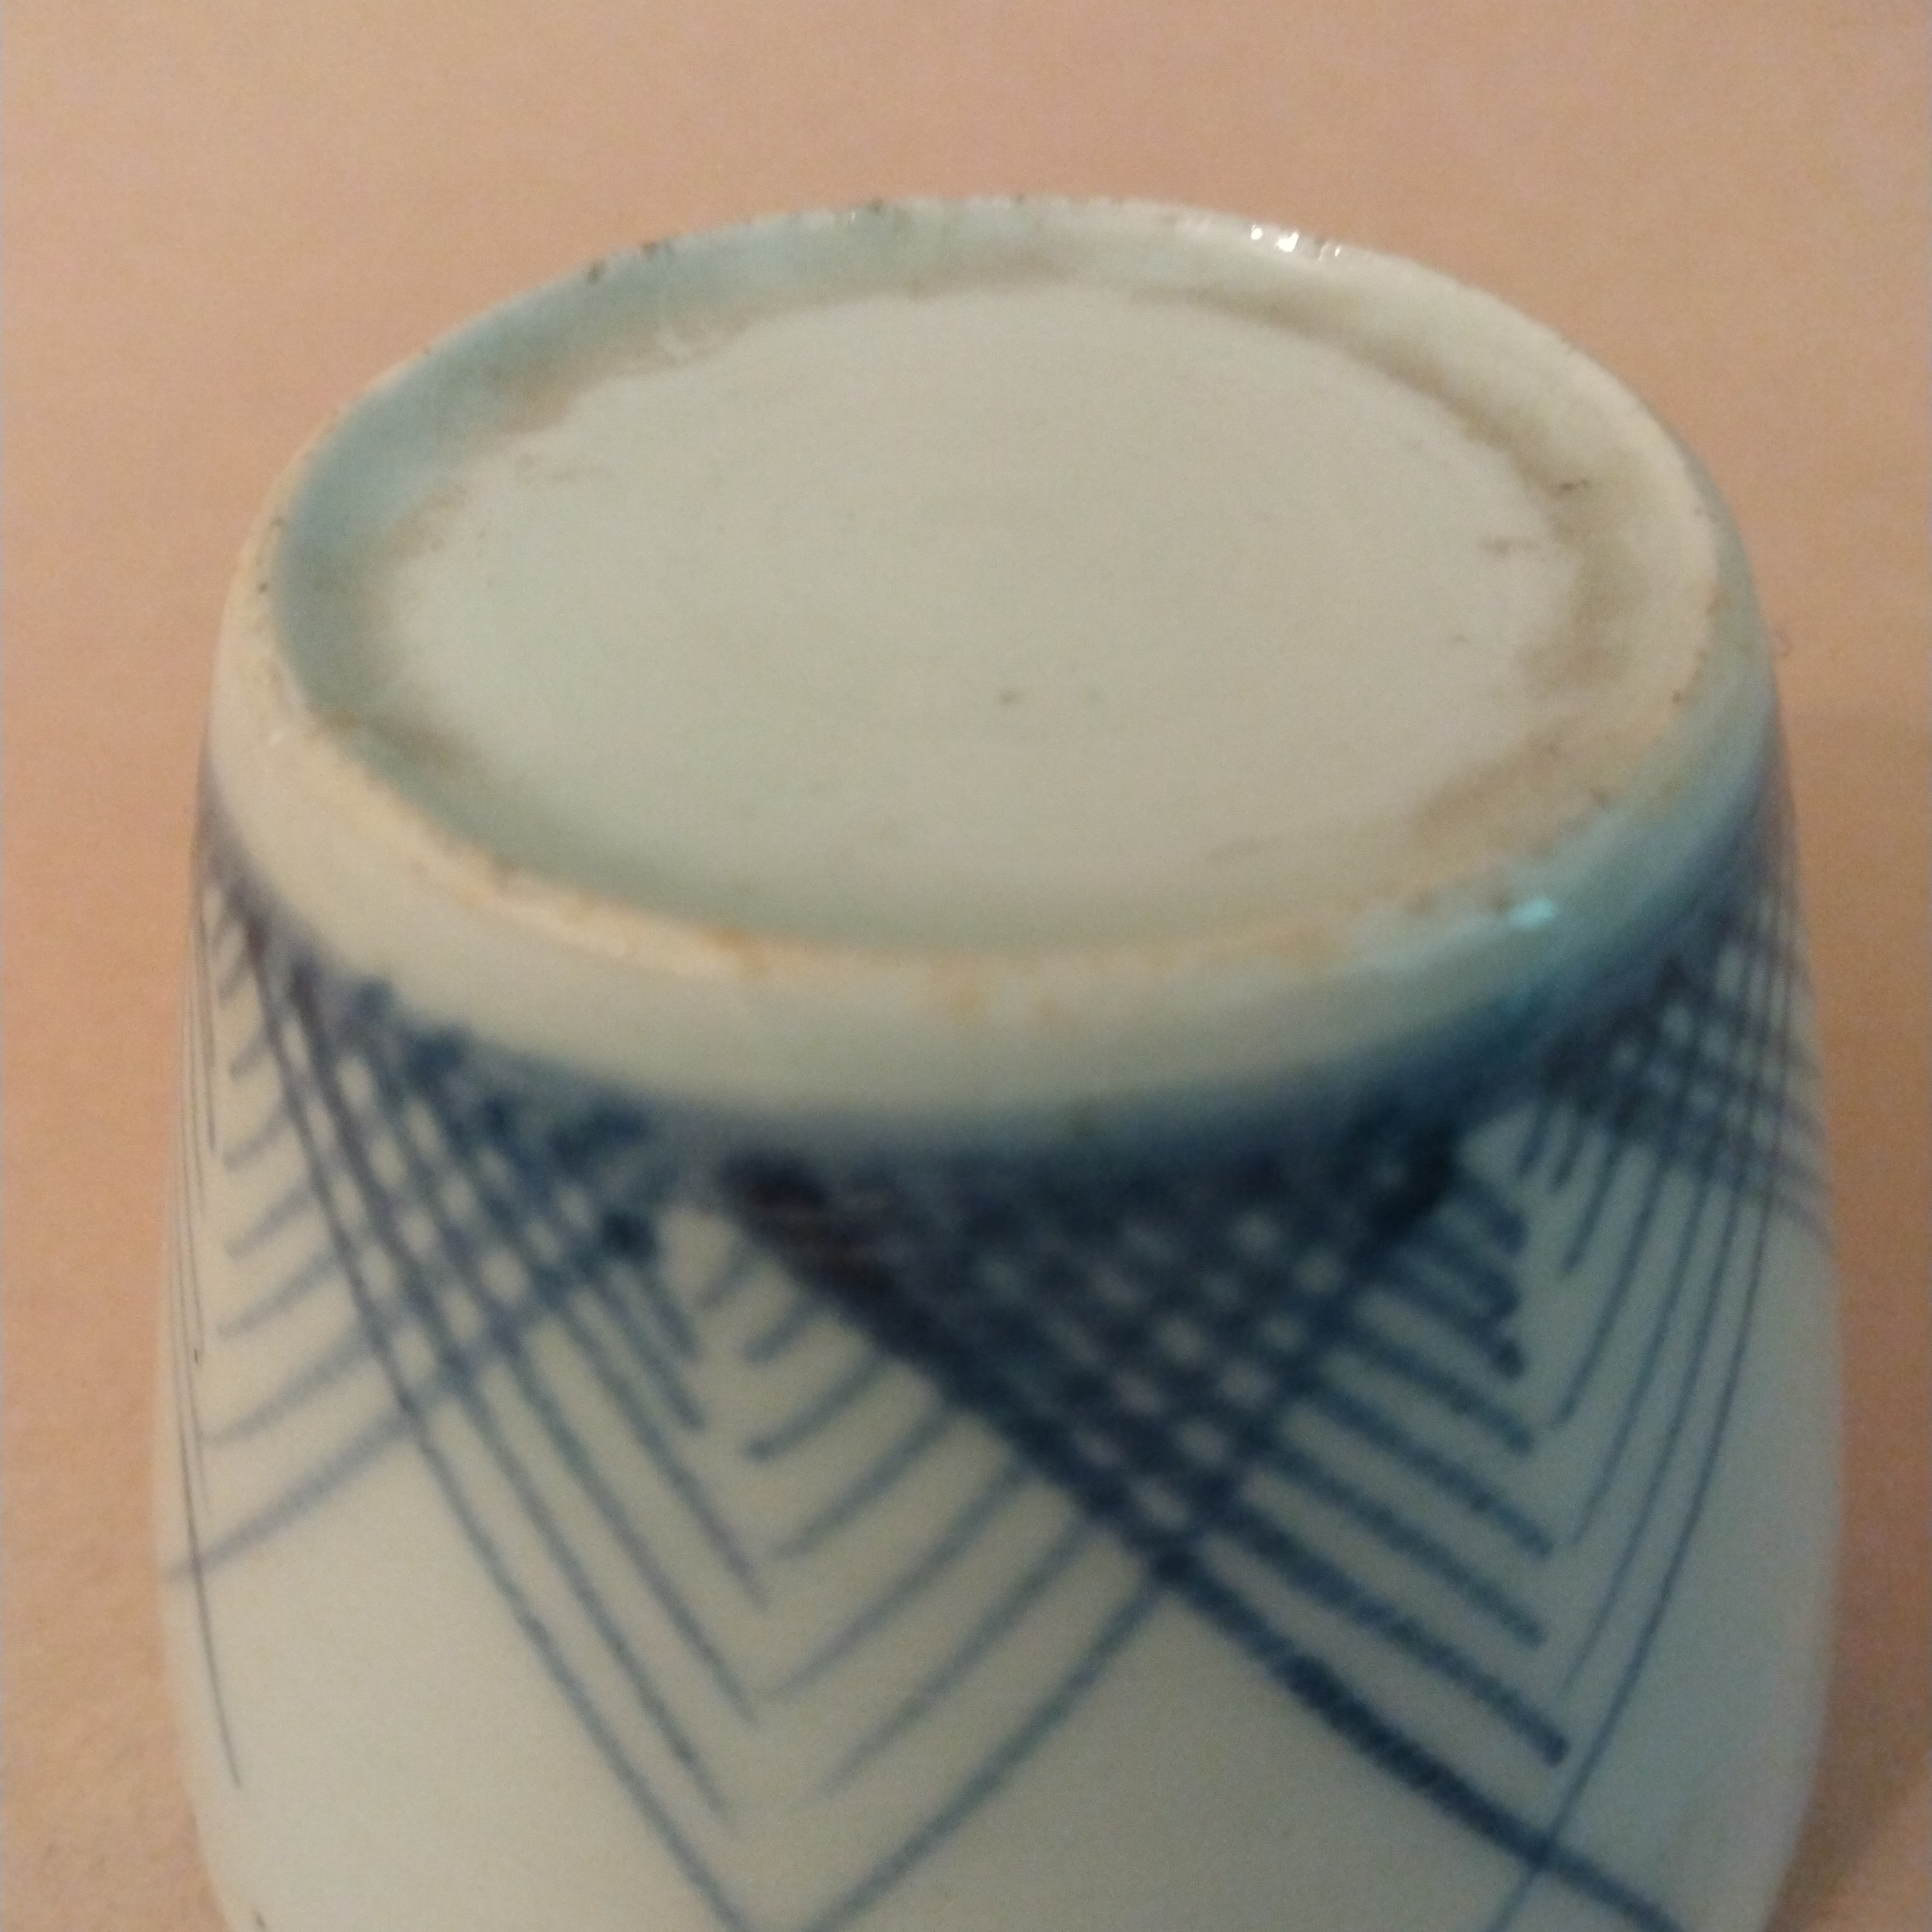 Imari Ware Soba Choko (Soba Noodle Dipping Cup) from the Mid-Late Edo period (1600-1868)